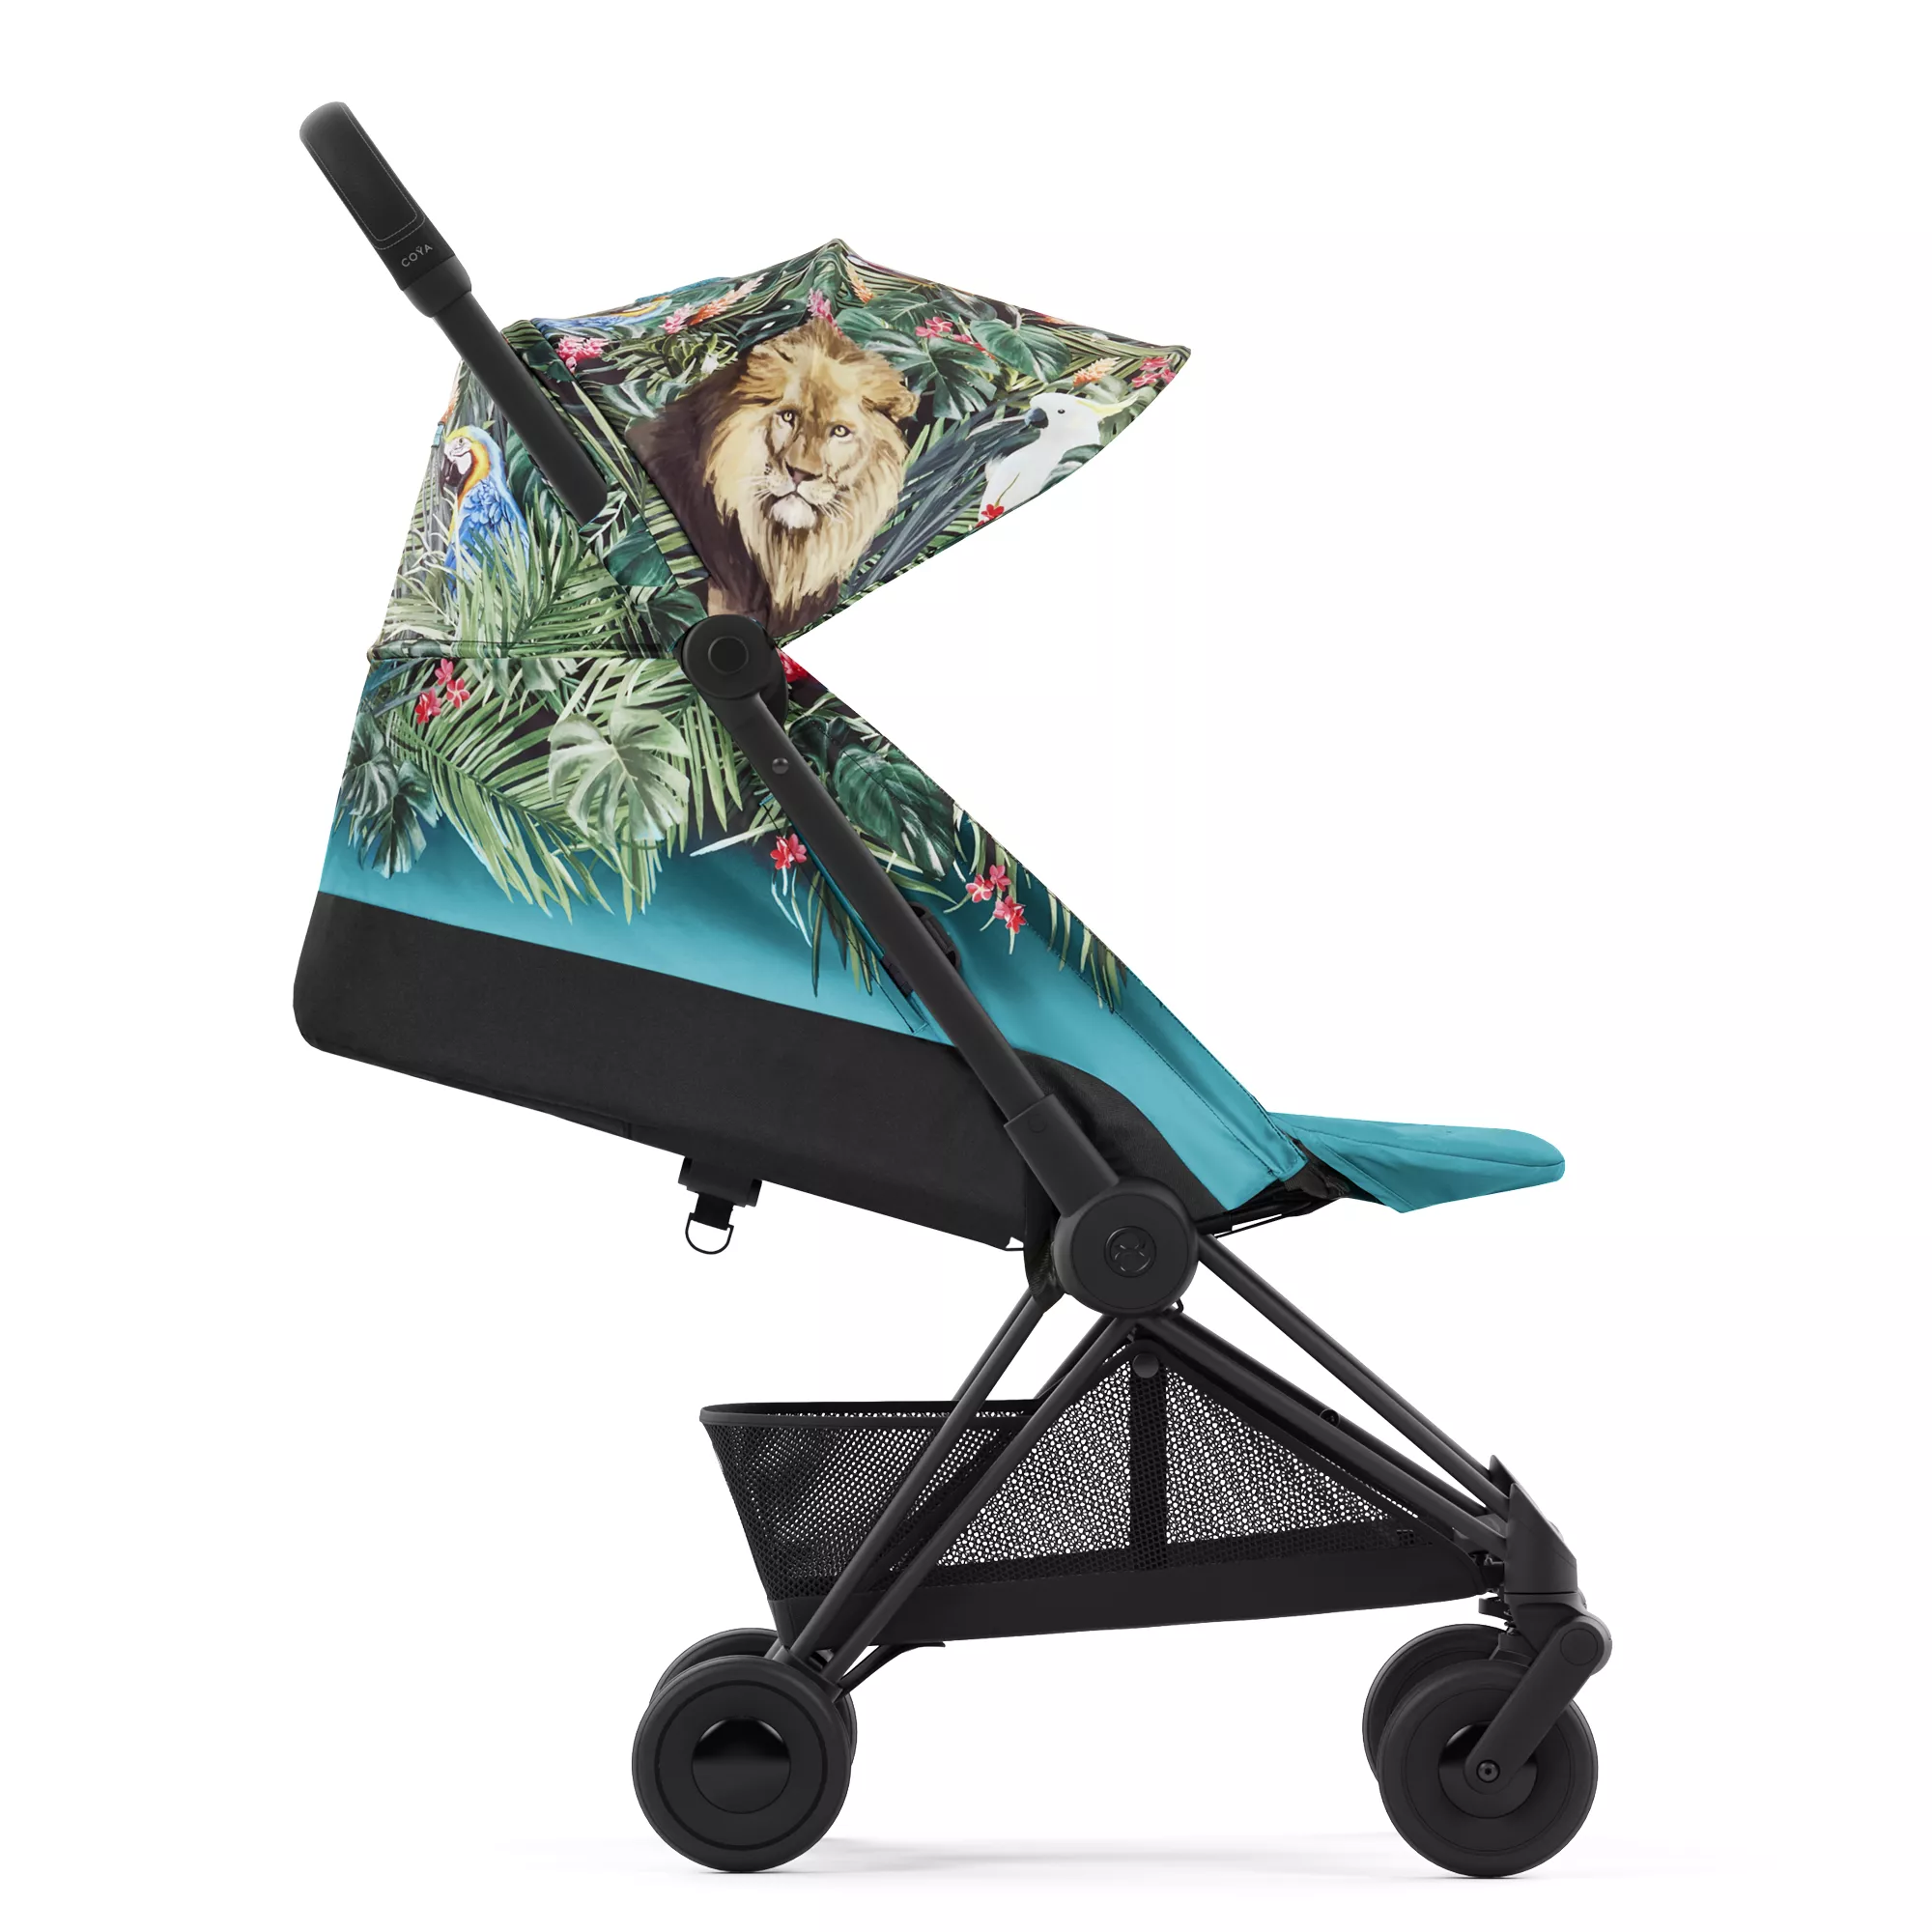 Cybex Coya | We The Best - Design Collaborations